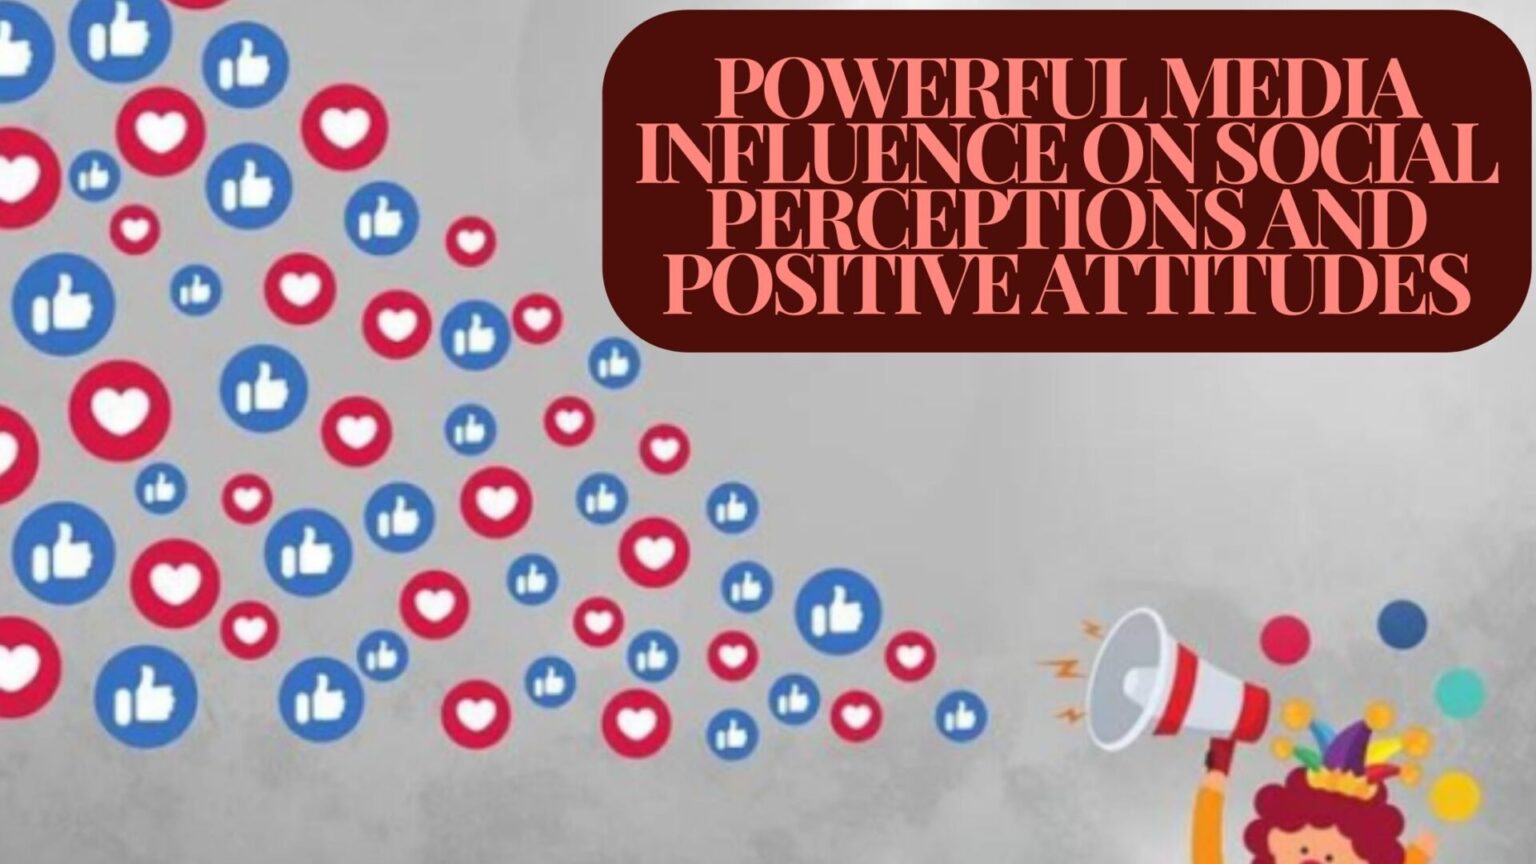 Powerful Media Influence on Social Perceptions and positive Attitudes